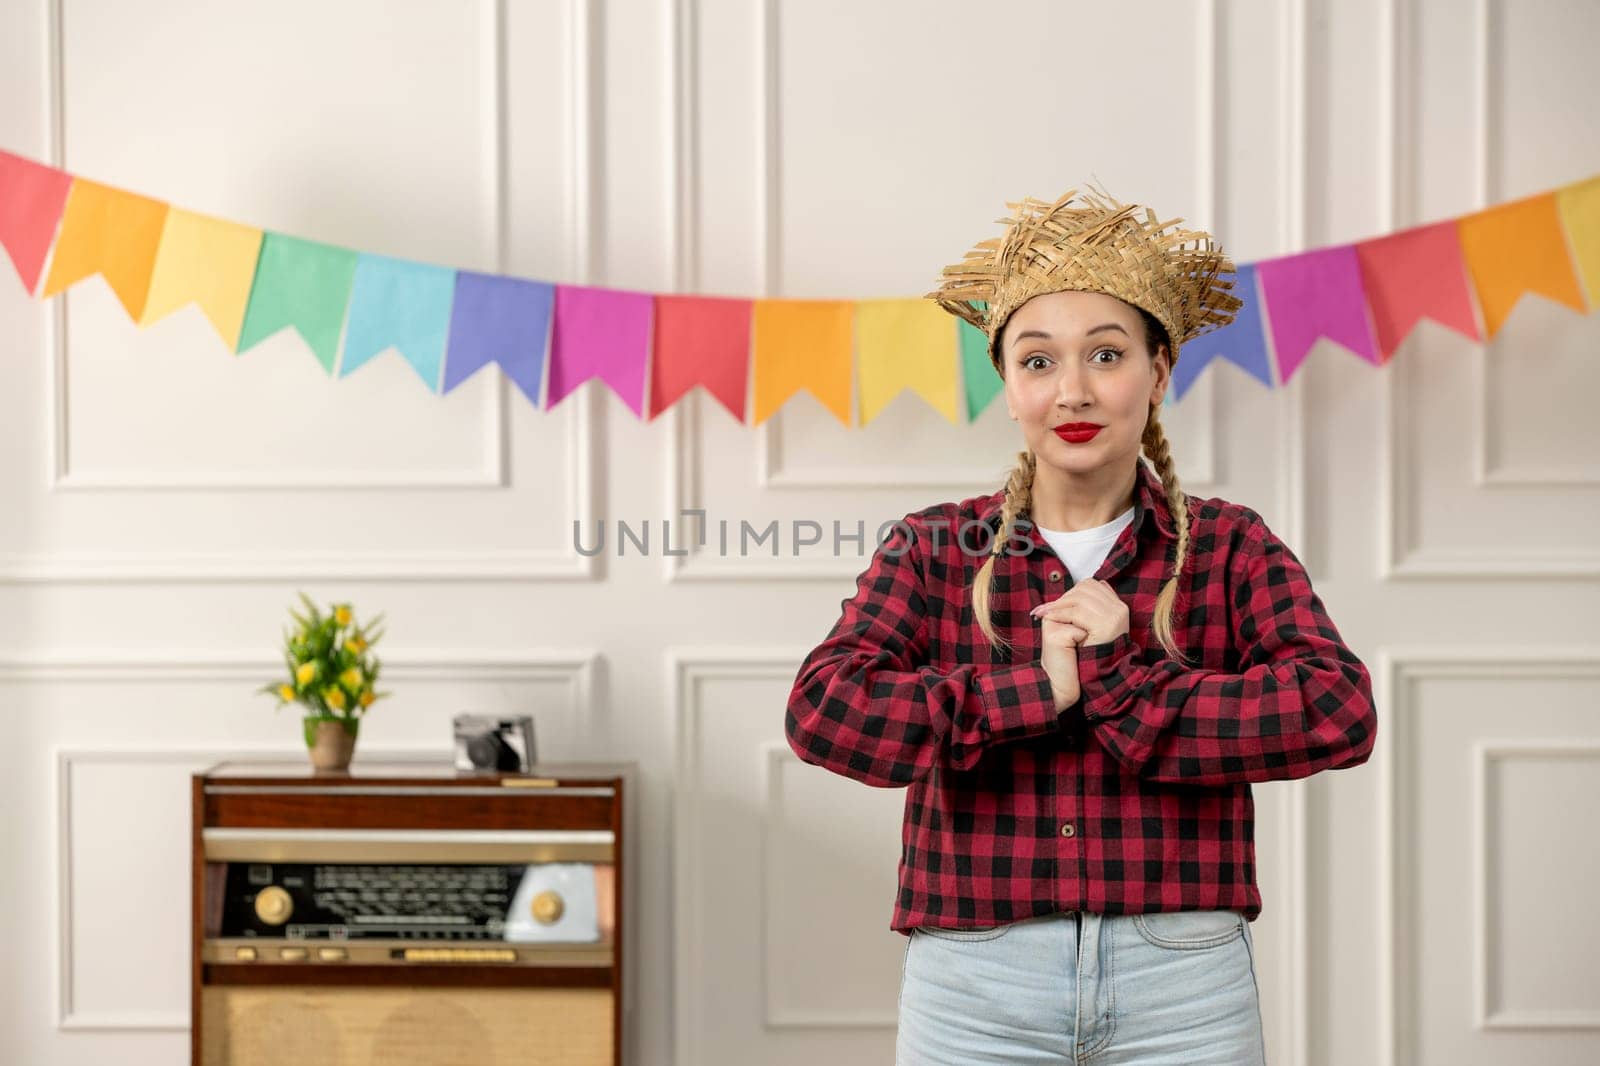 festa junina cute girl in straw hat brazilian midsummer with retro radio colorful flags excited